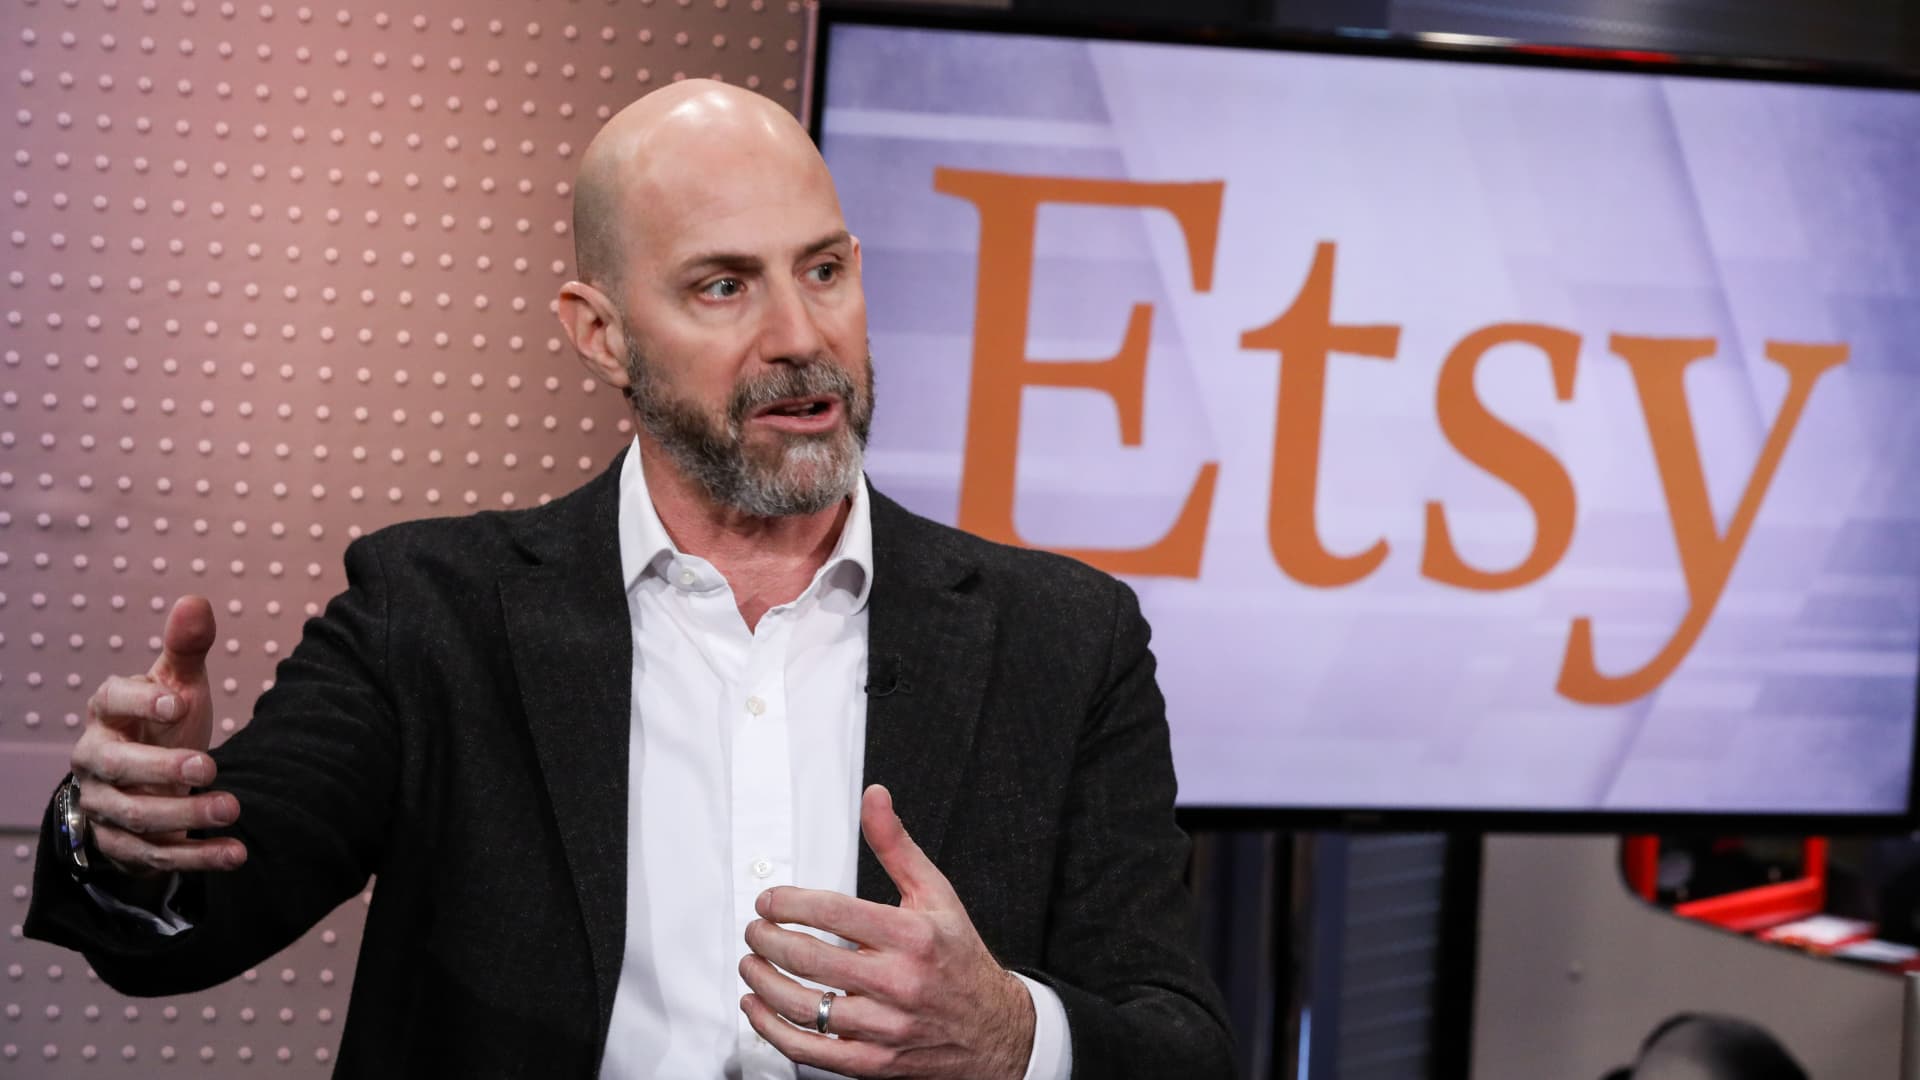 Etsy stock falls after company lays off 11% of its staff, citing ‘very challenging’ environment